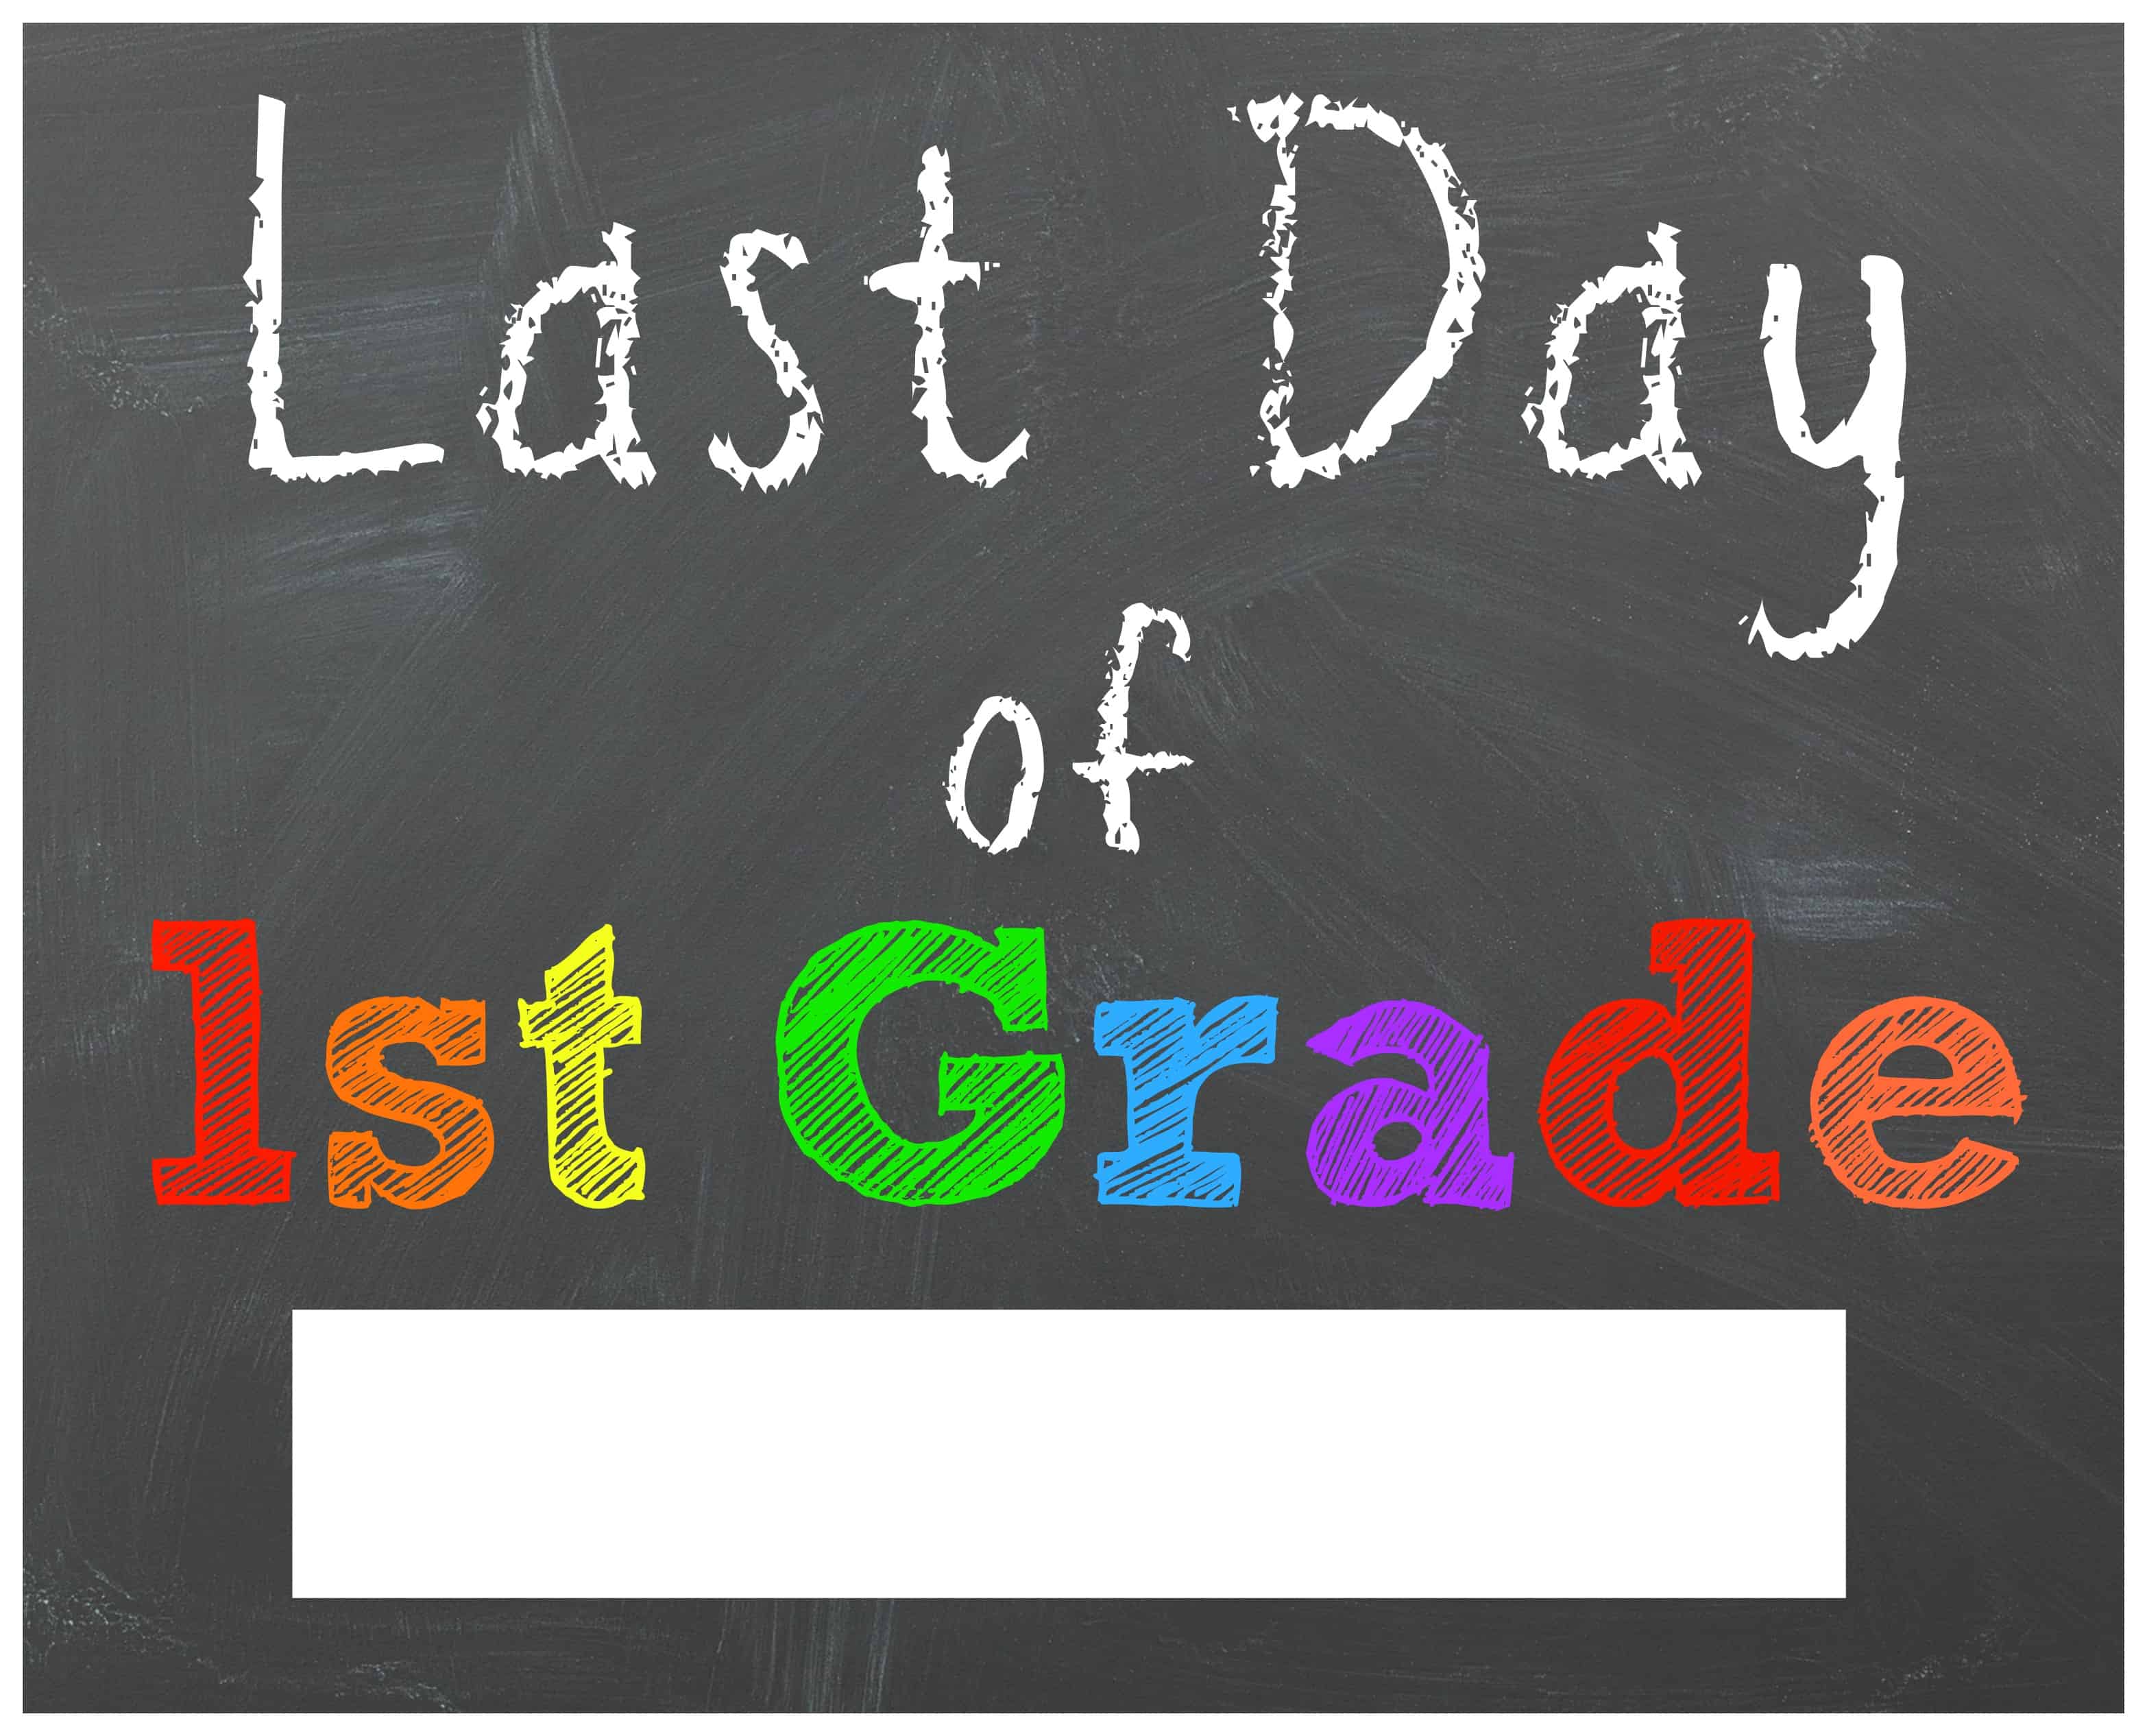 last-day-of-first-grade-printable